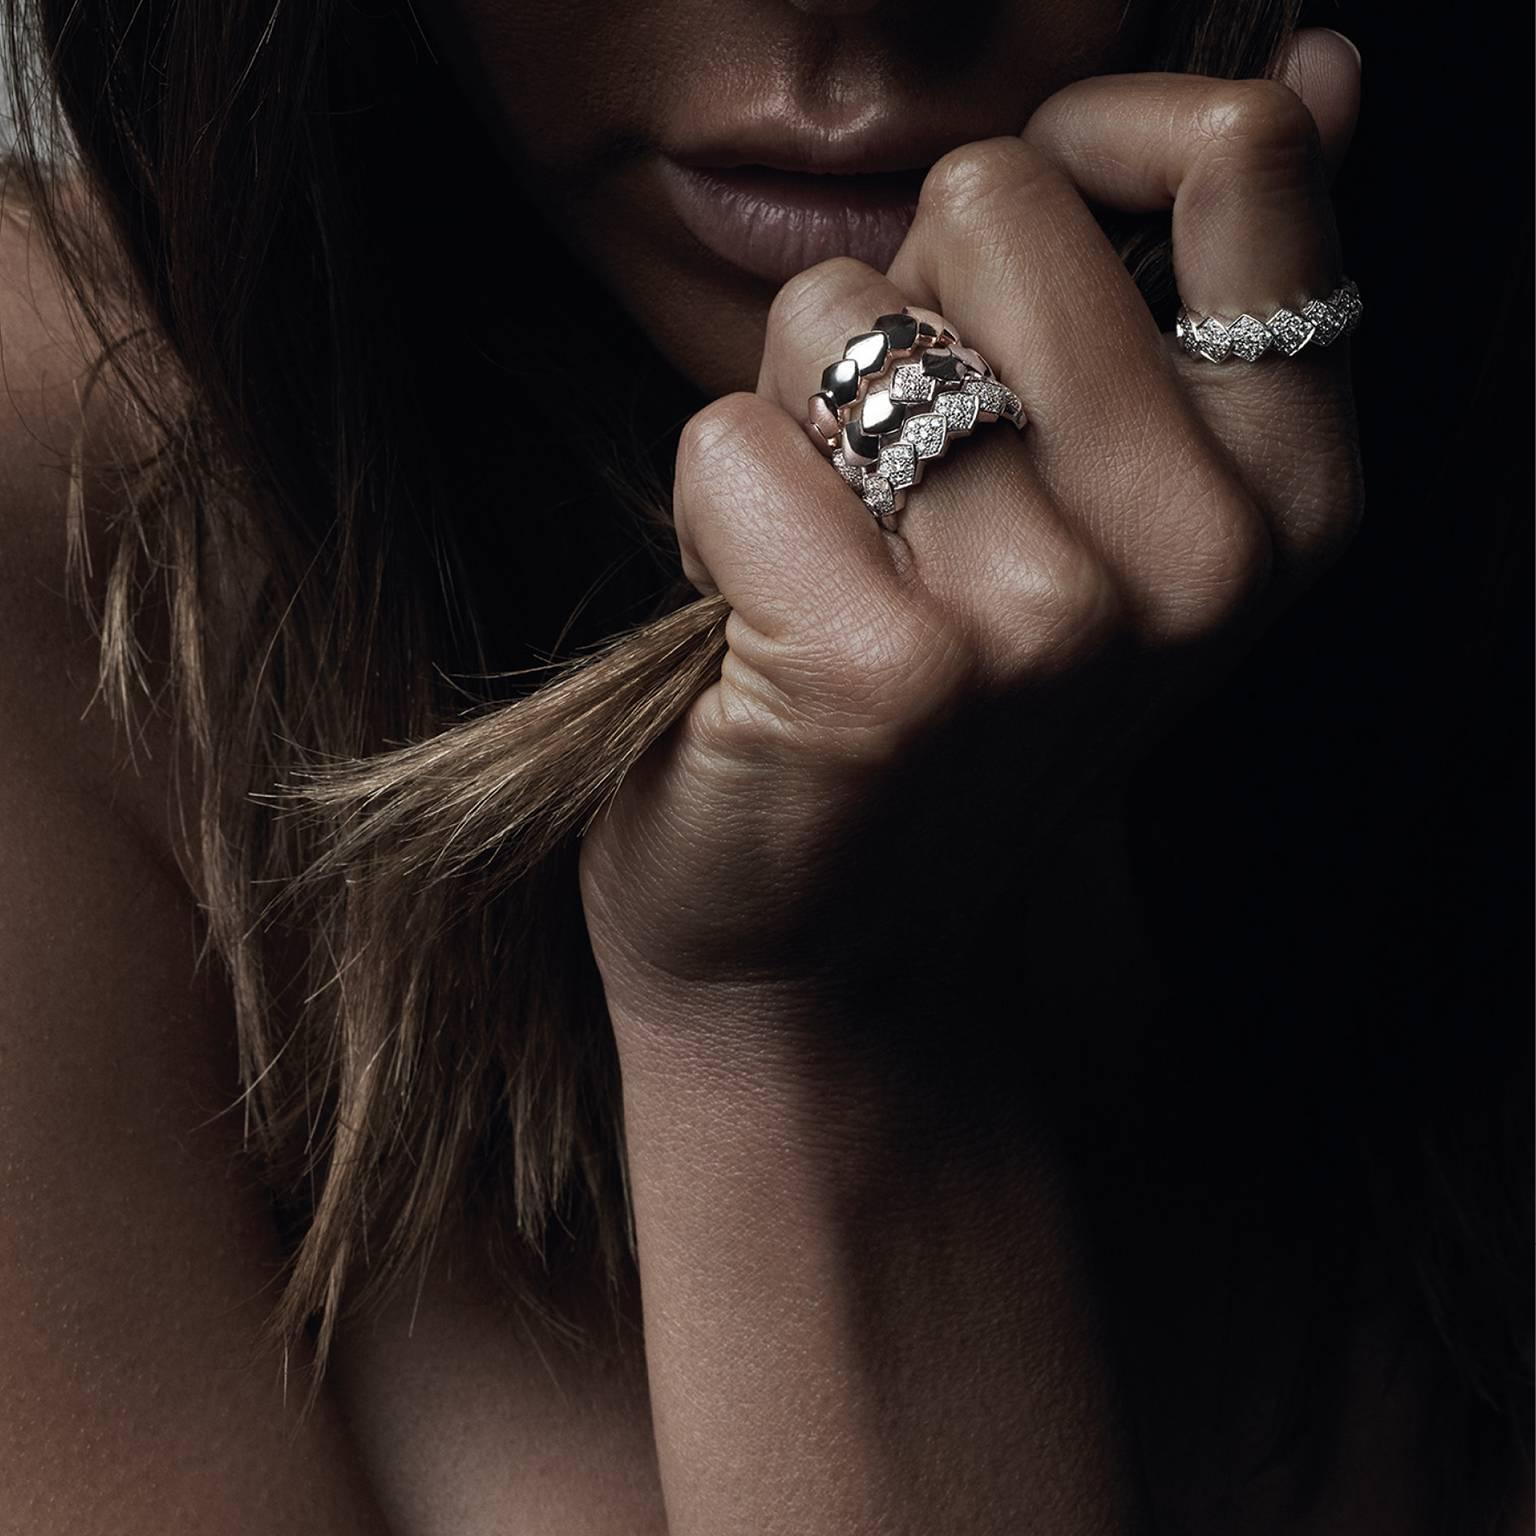 18K Rose Gold AKILLIS Python ring
 
With the Python collection AKILLIS takes the bold graphic power of snake scales and weaves them into a modern evocation of a tattoo that hugs the skin. Capturing the quintessence of the python Cleopatra loved to